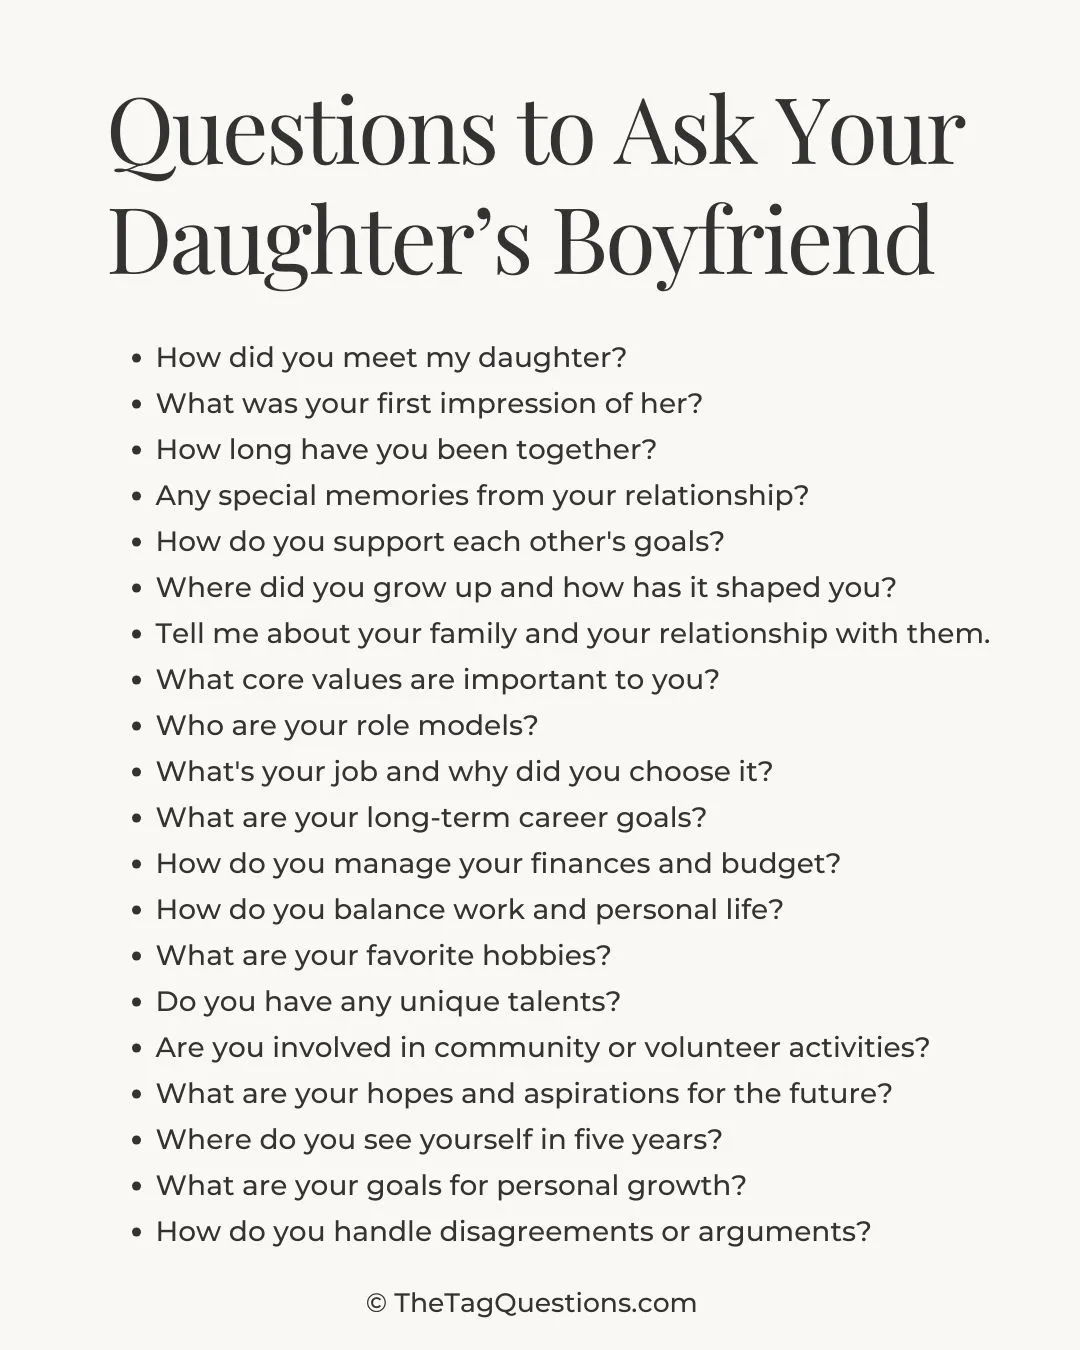 Questions to Ask Your Daughter’s Boyfriend